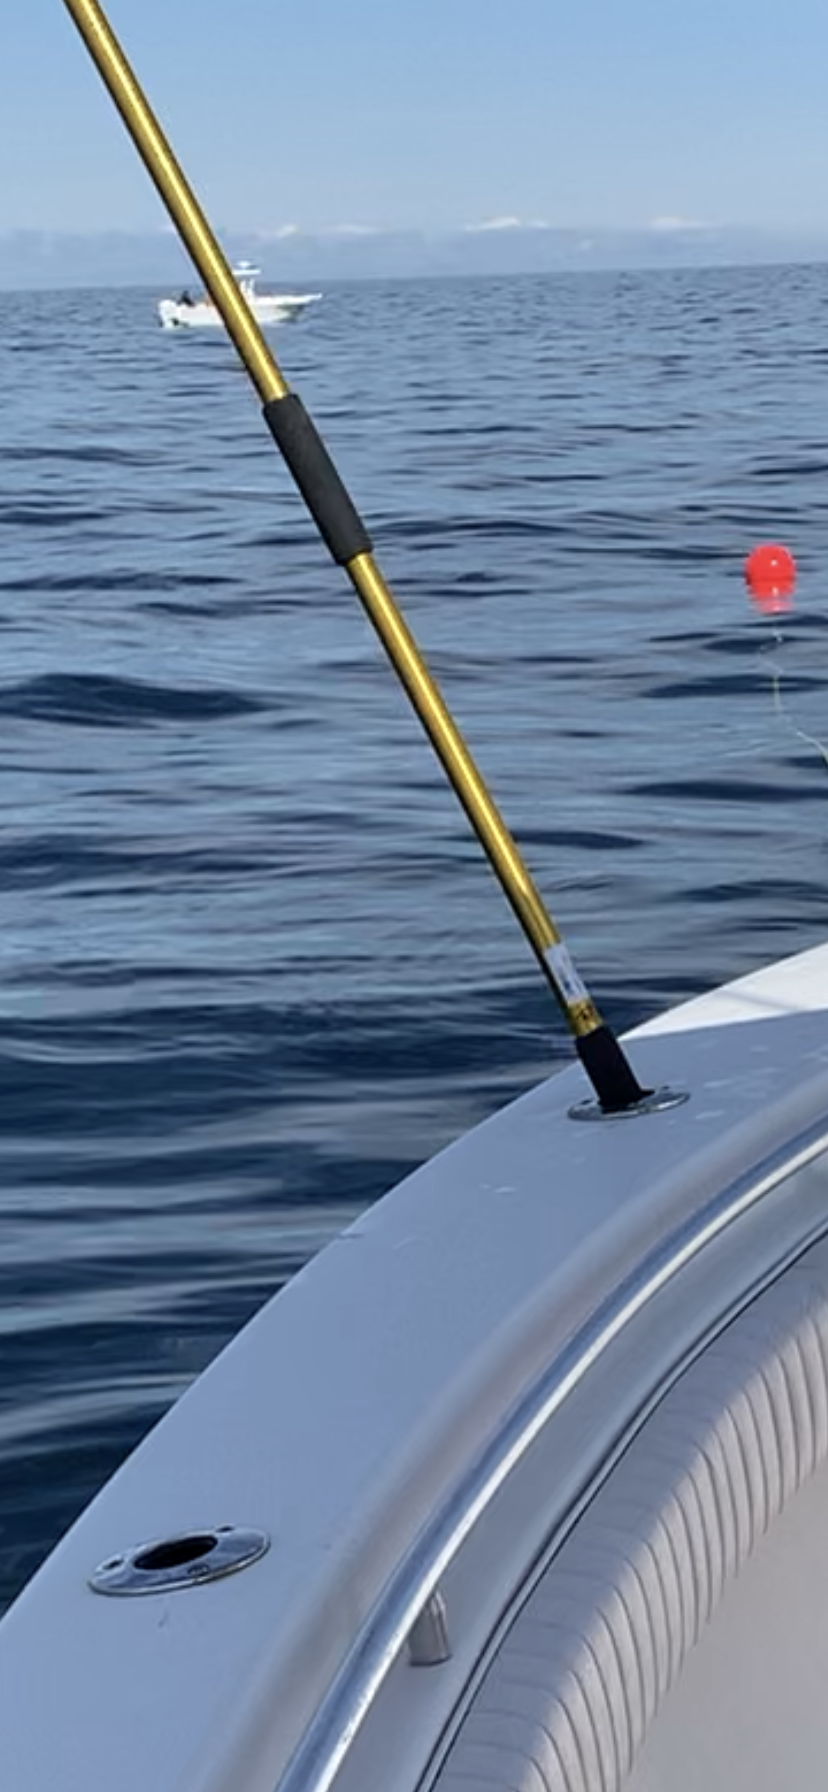 fish measuring ruler best length? - The Hull Truth - Boating